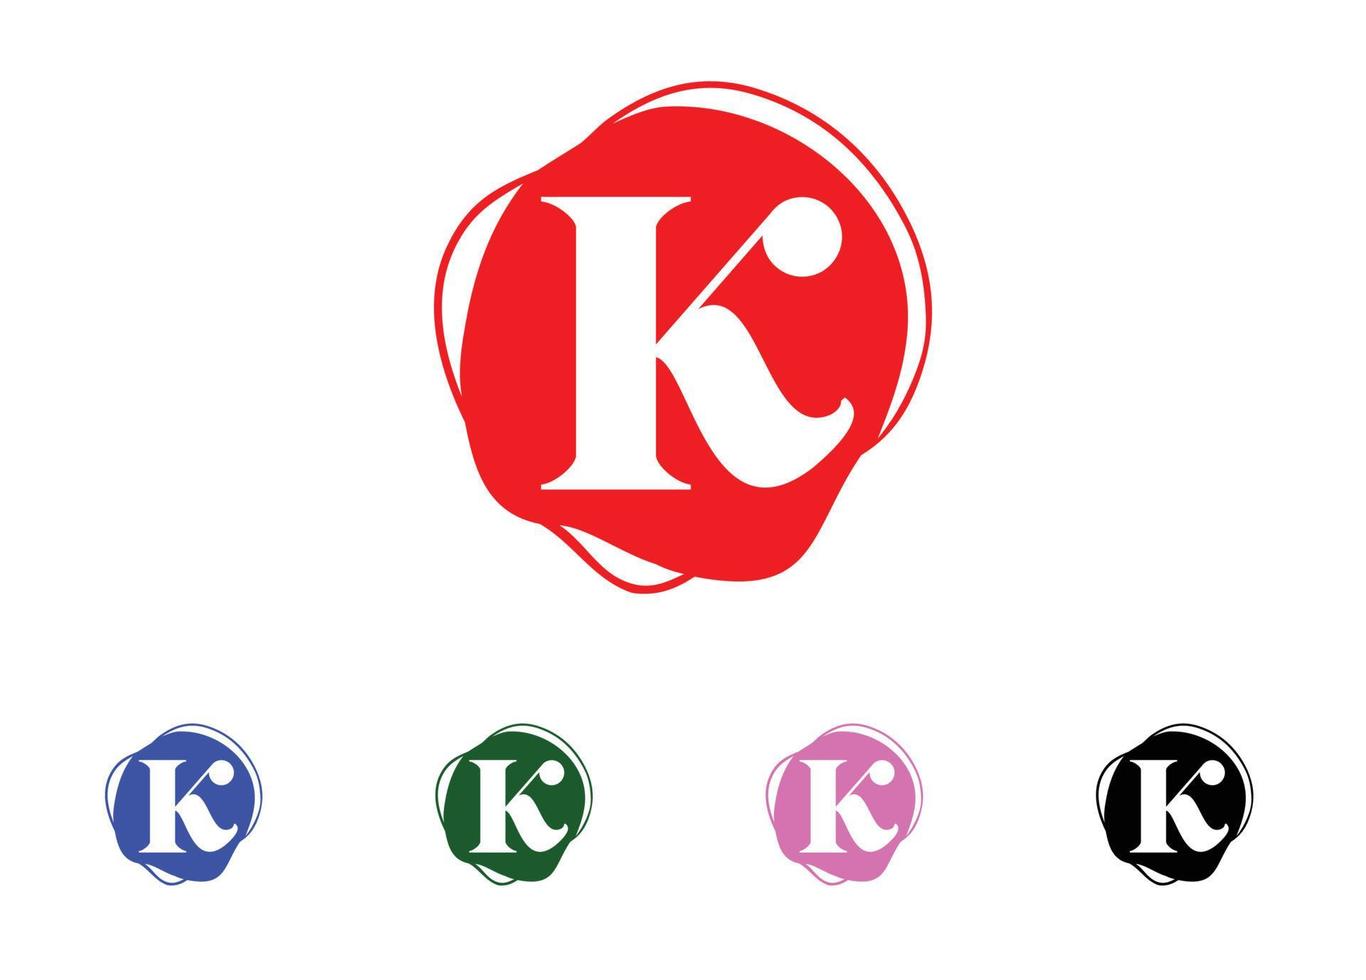 K letter logo and icon design template vector